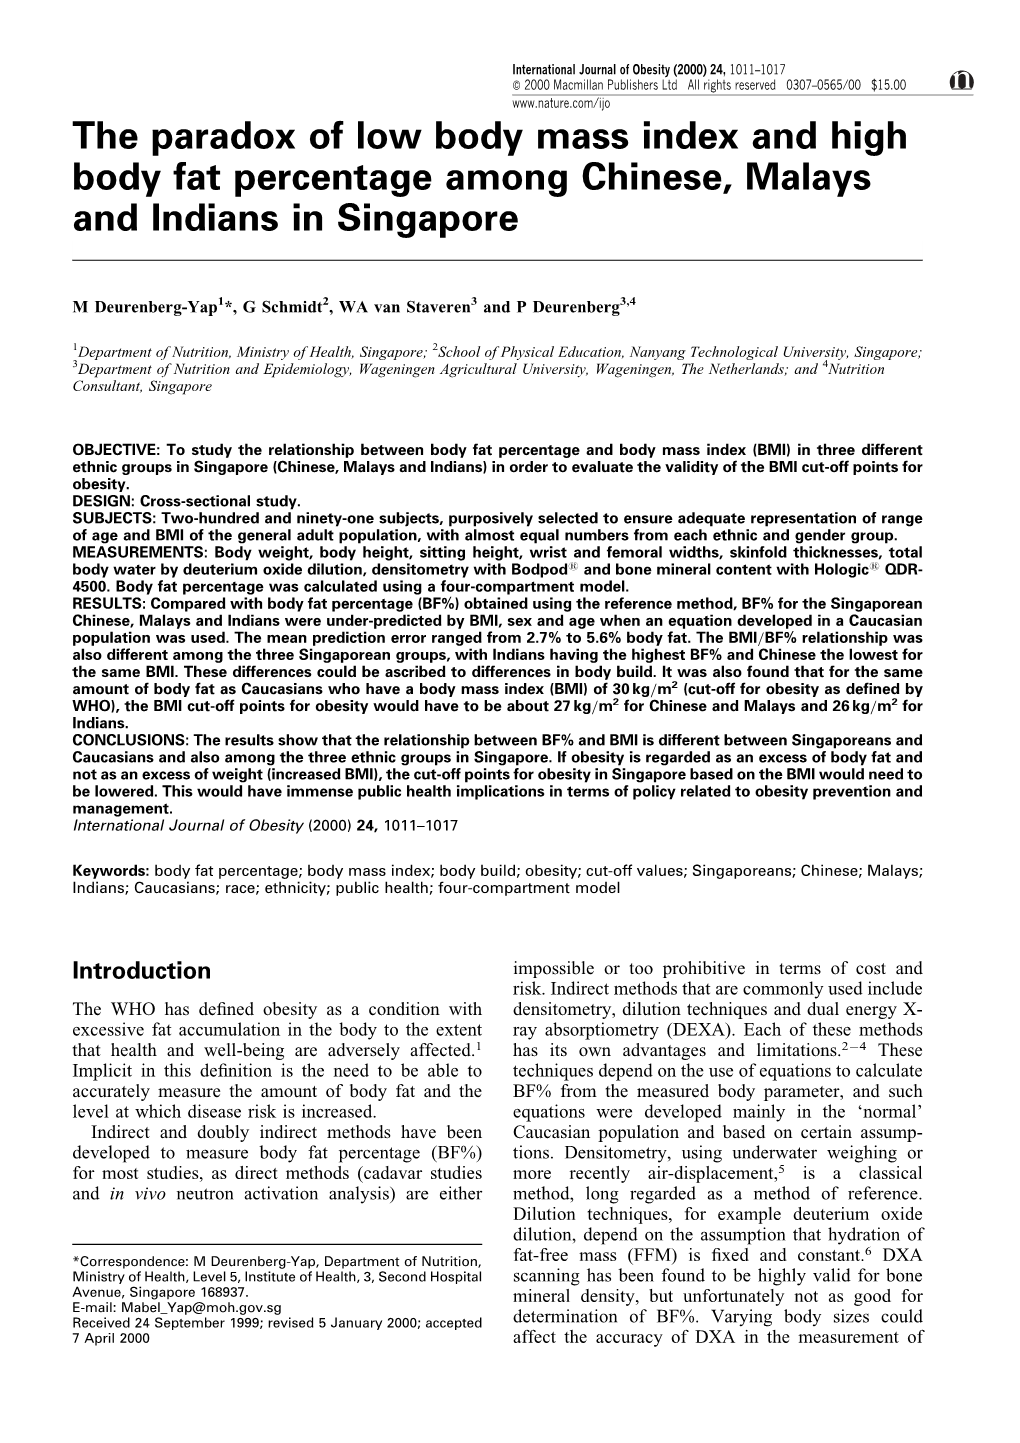 The Paradox of Low Body Mass Index and High Body Fat Percentage Among Chinese, Malays and Indians in Singapore